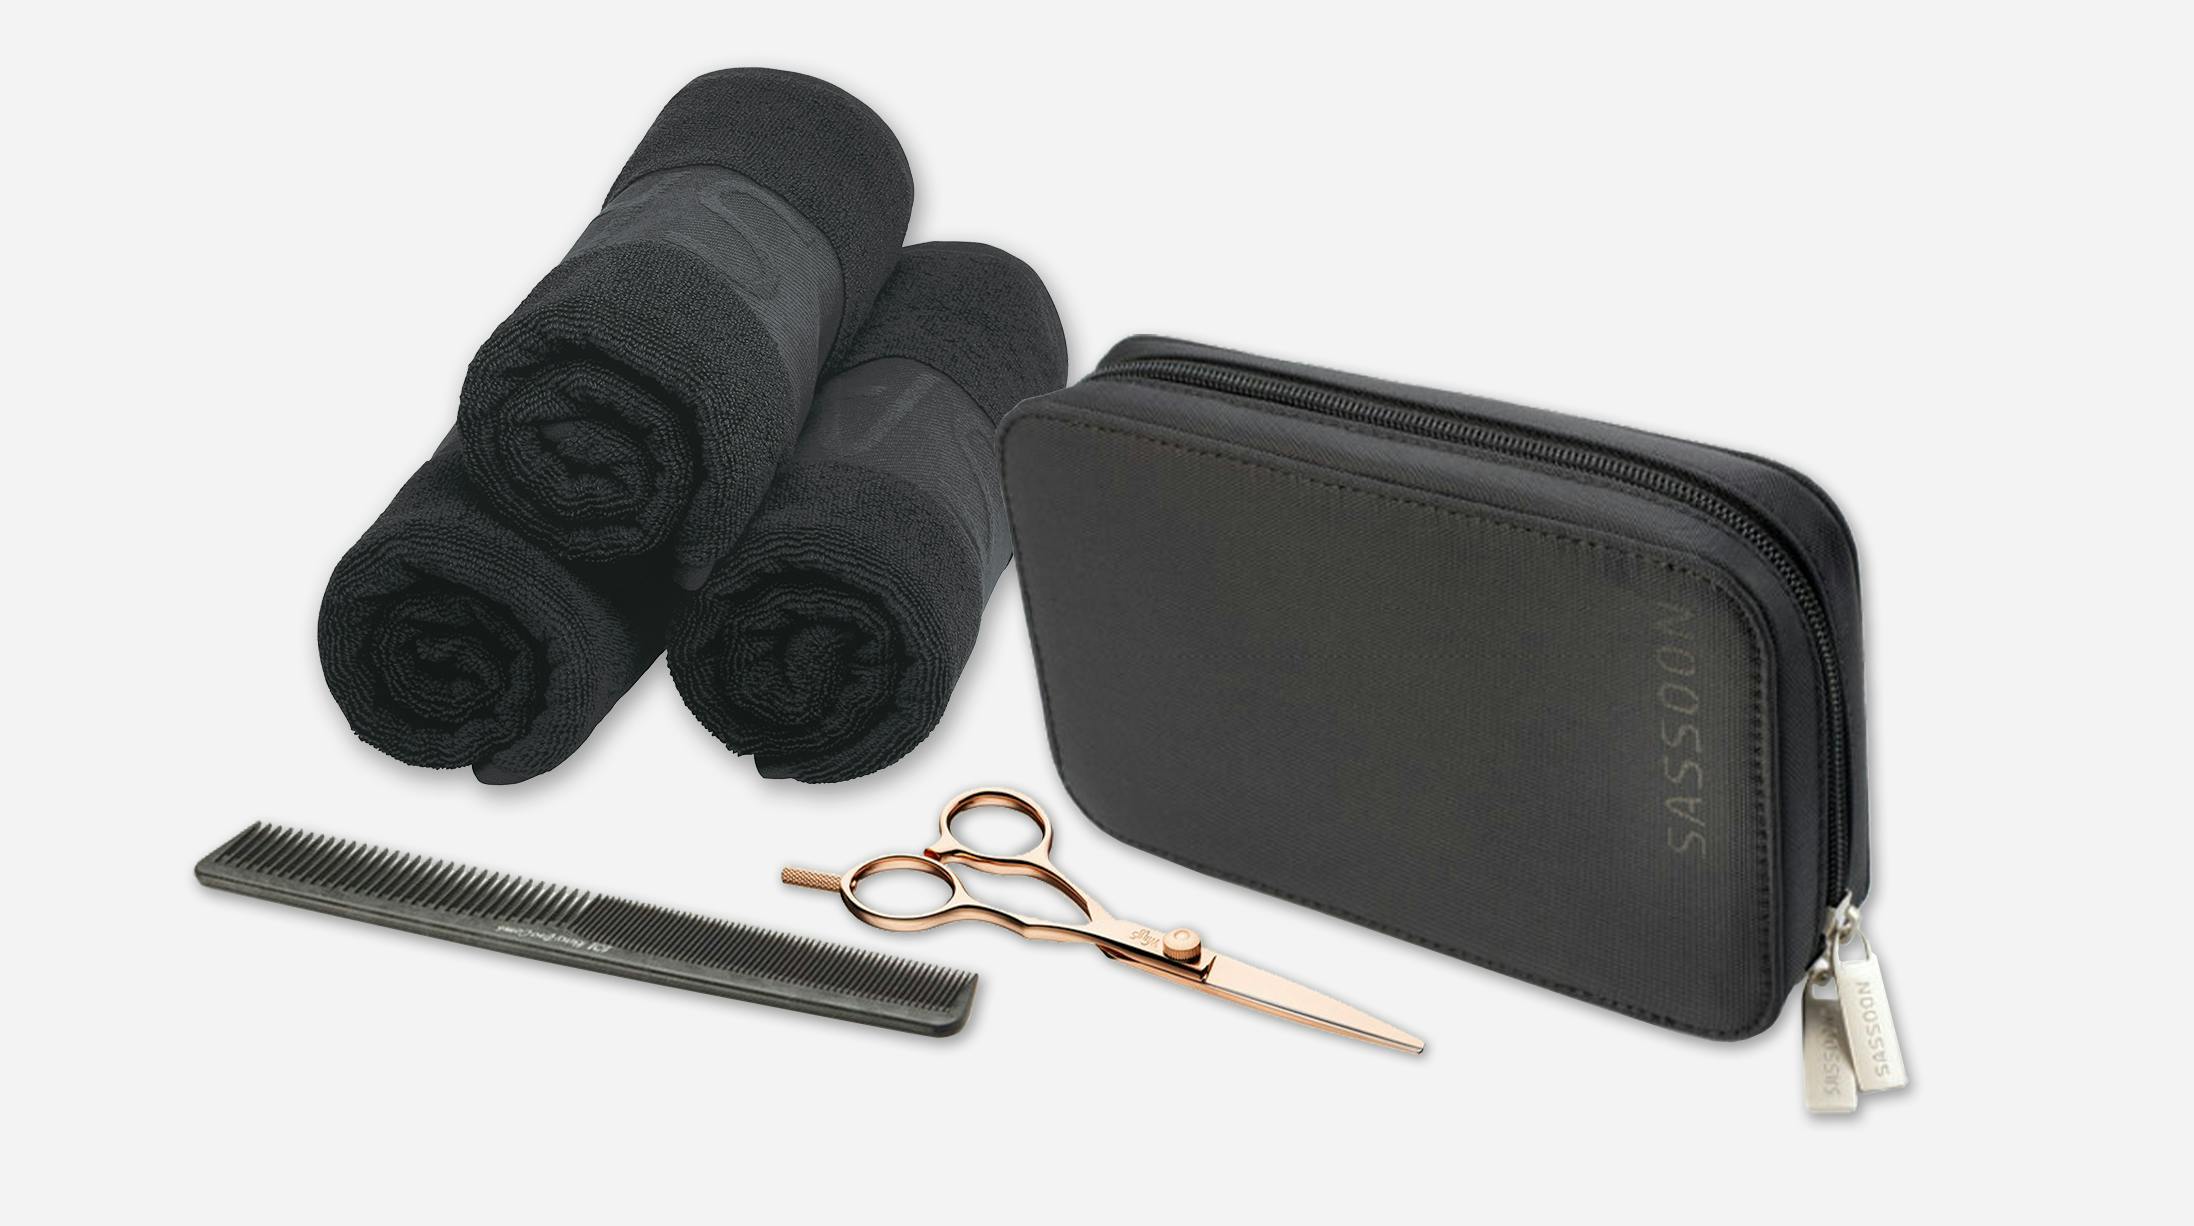 Sassoon accessories for professionals